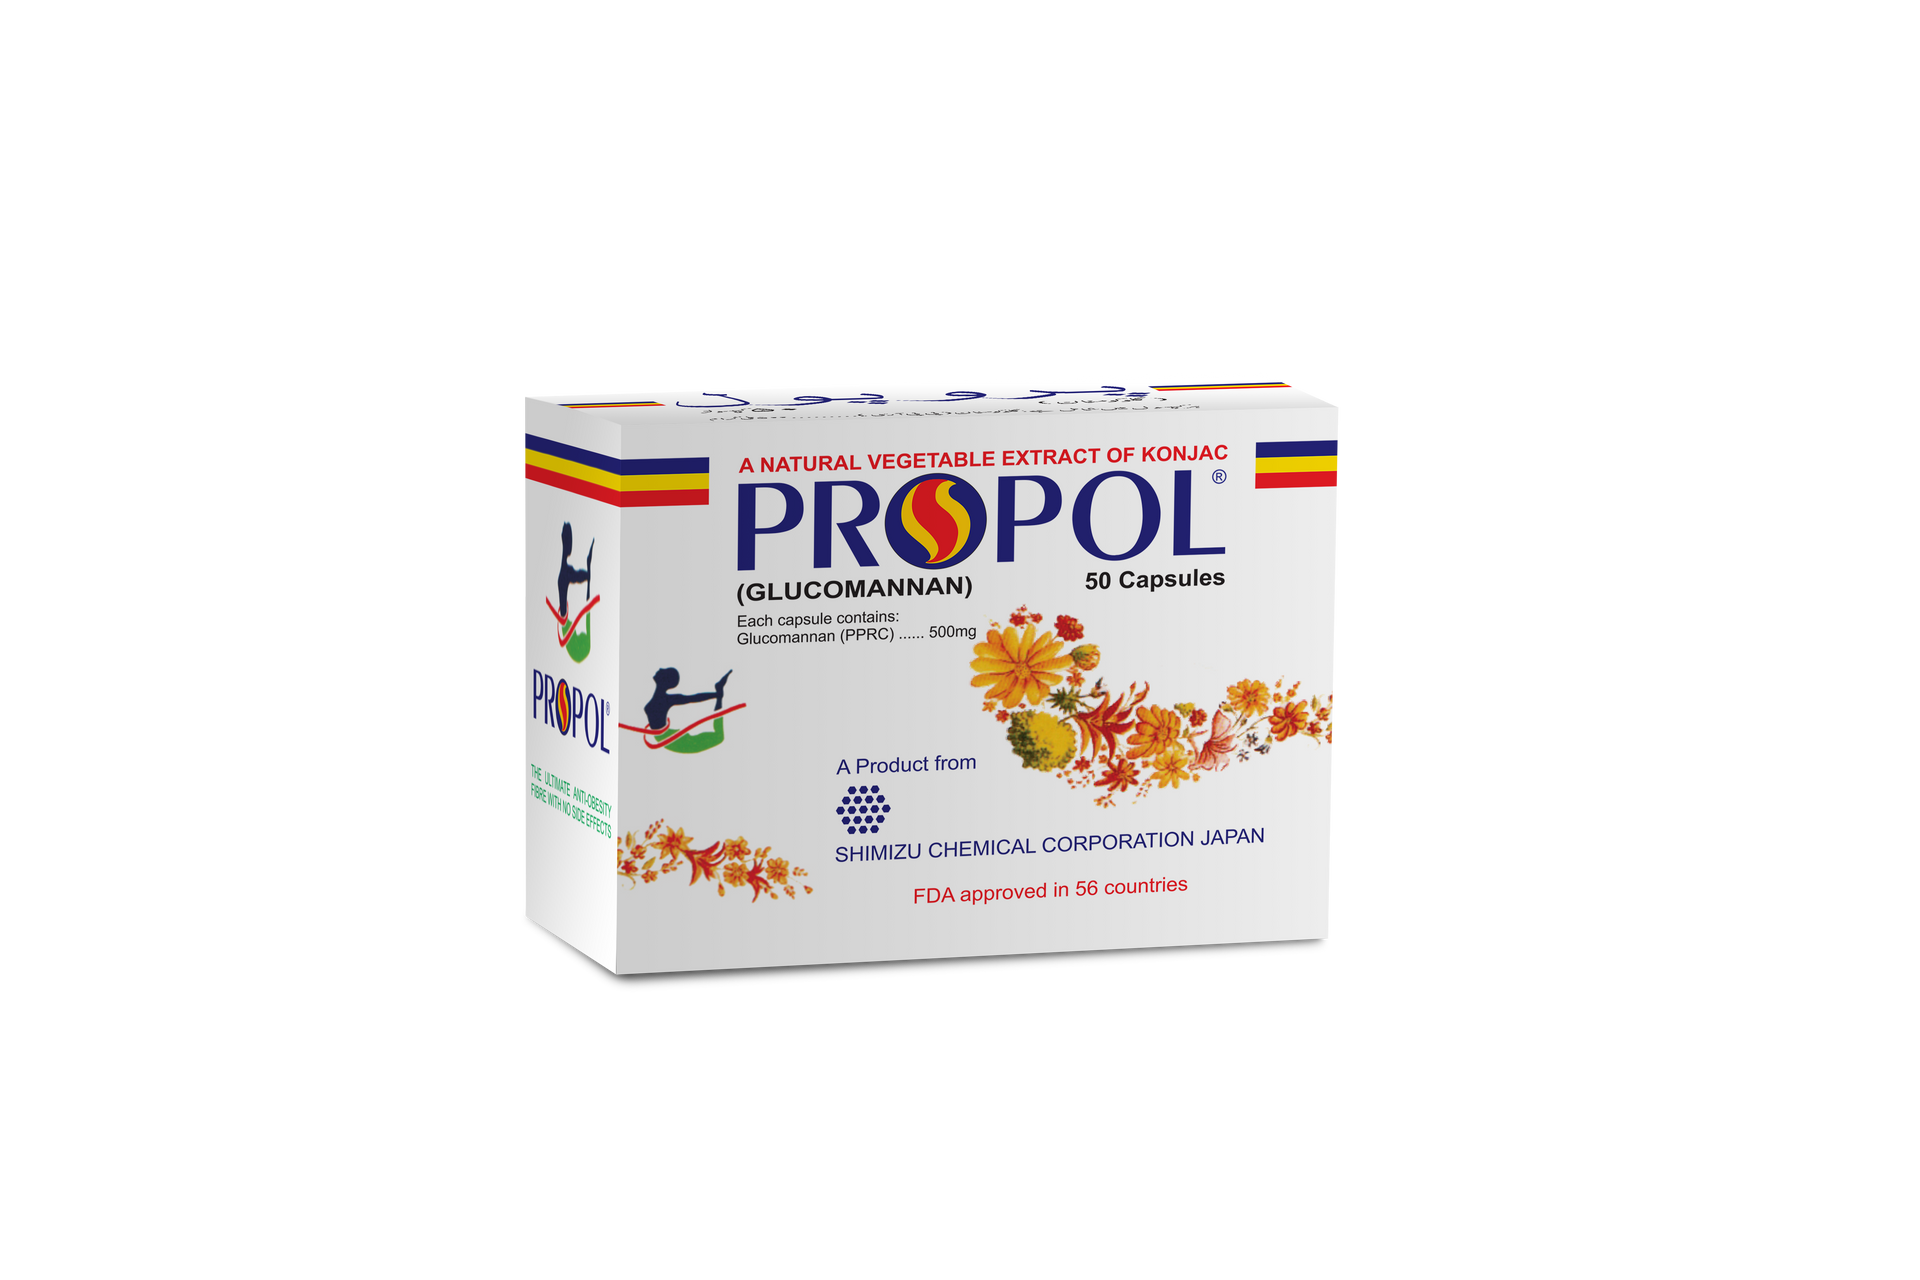 Propol - Glucomannan Capsules for Obesity Control